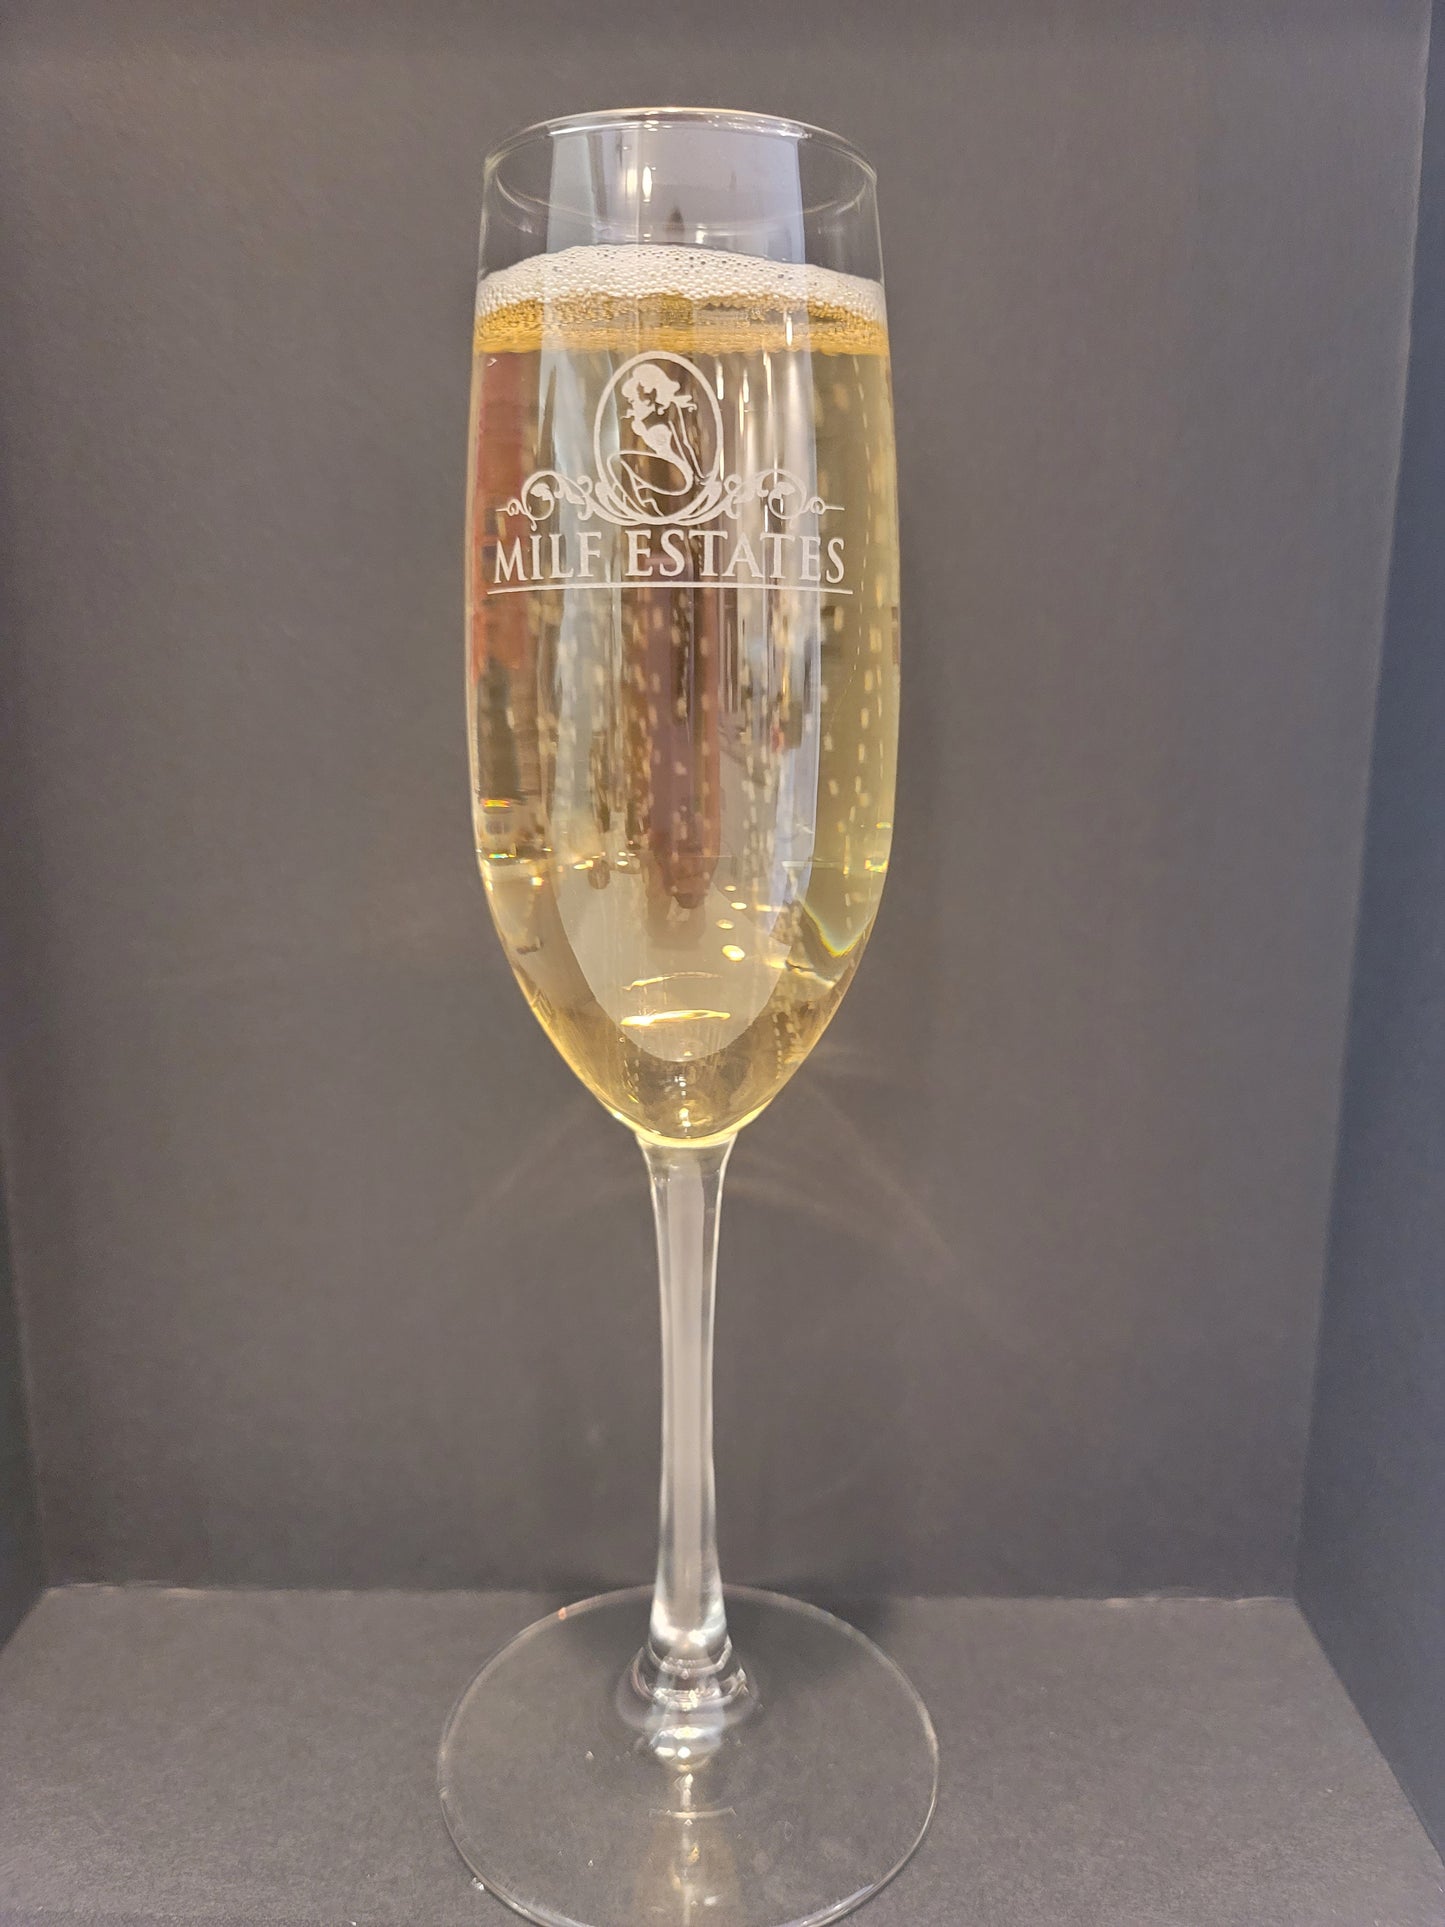 MILF ESTATES - Champagne Glass   "Limited Quantities- Special Order Now"